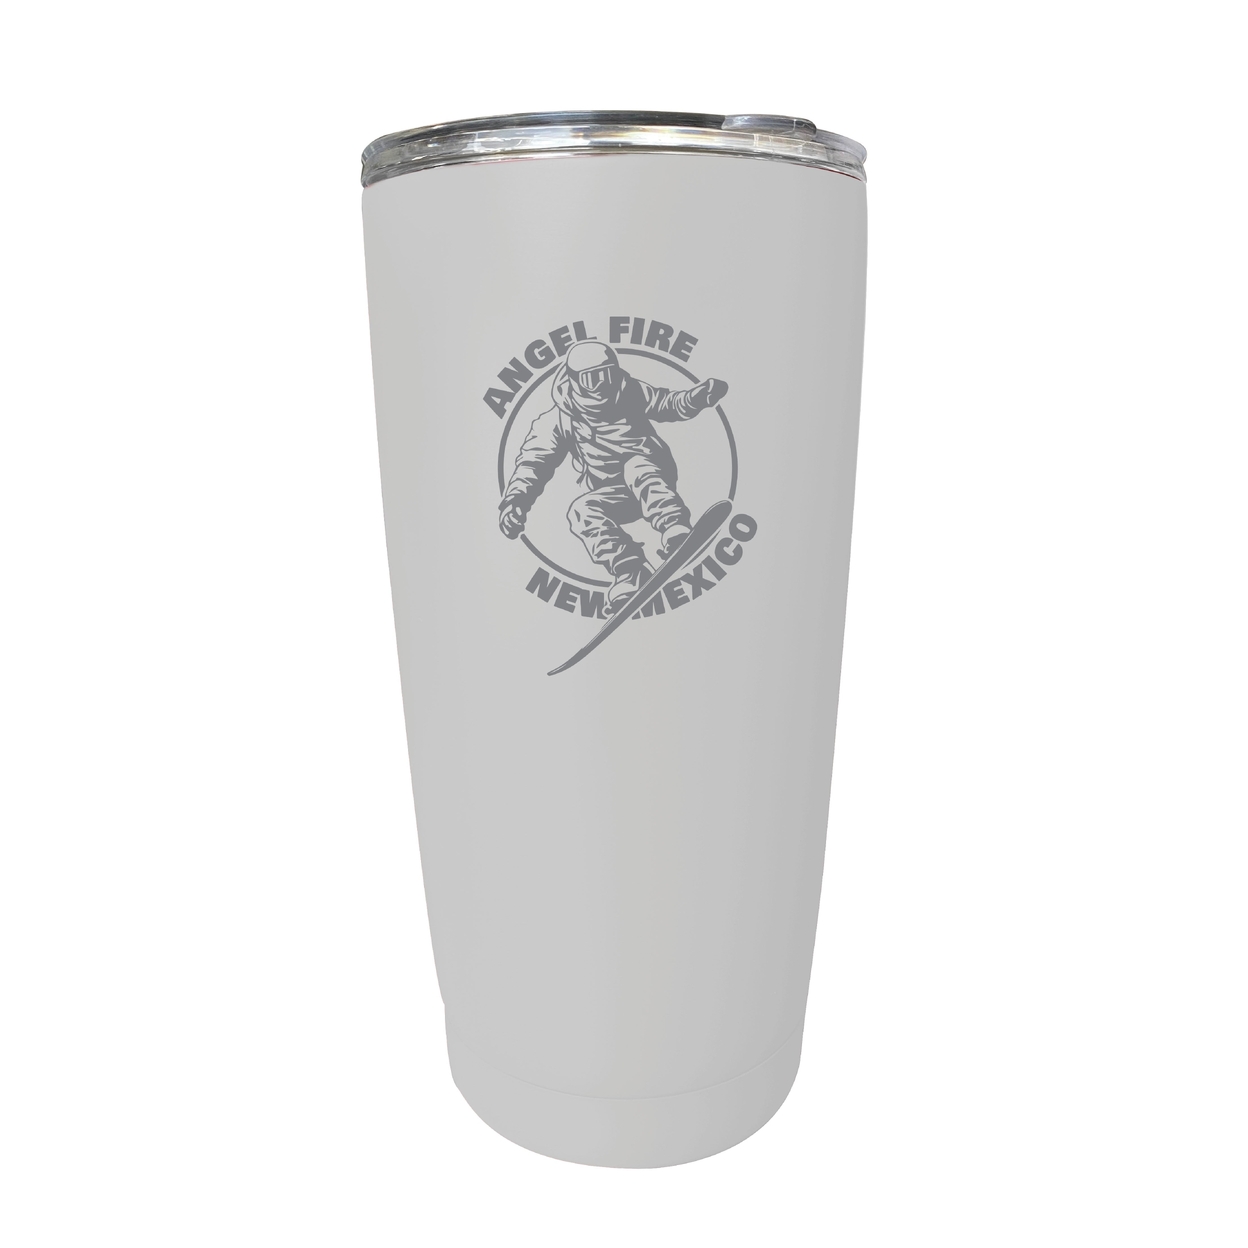 Angel Fire New Mexico Souvenir 16 Oz Engraved Stainless Steel Insulated Tumbler - Red,,4-Pack